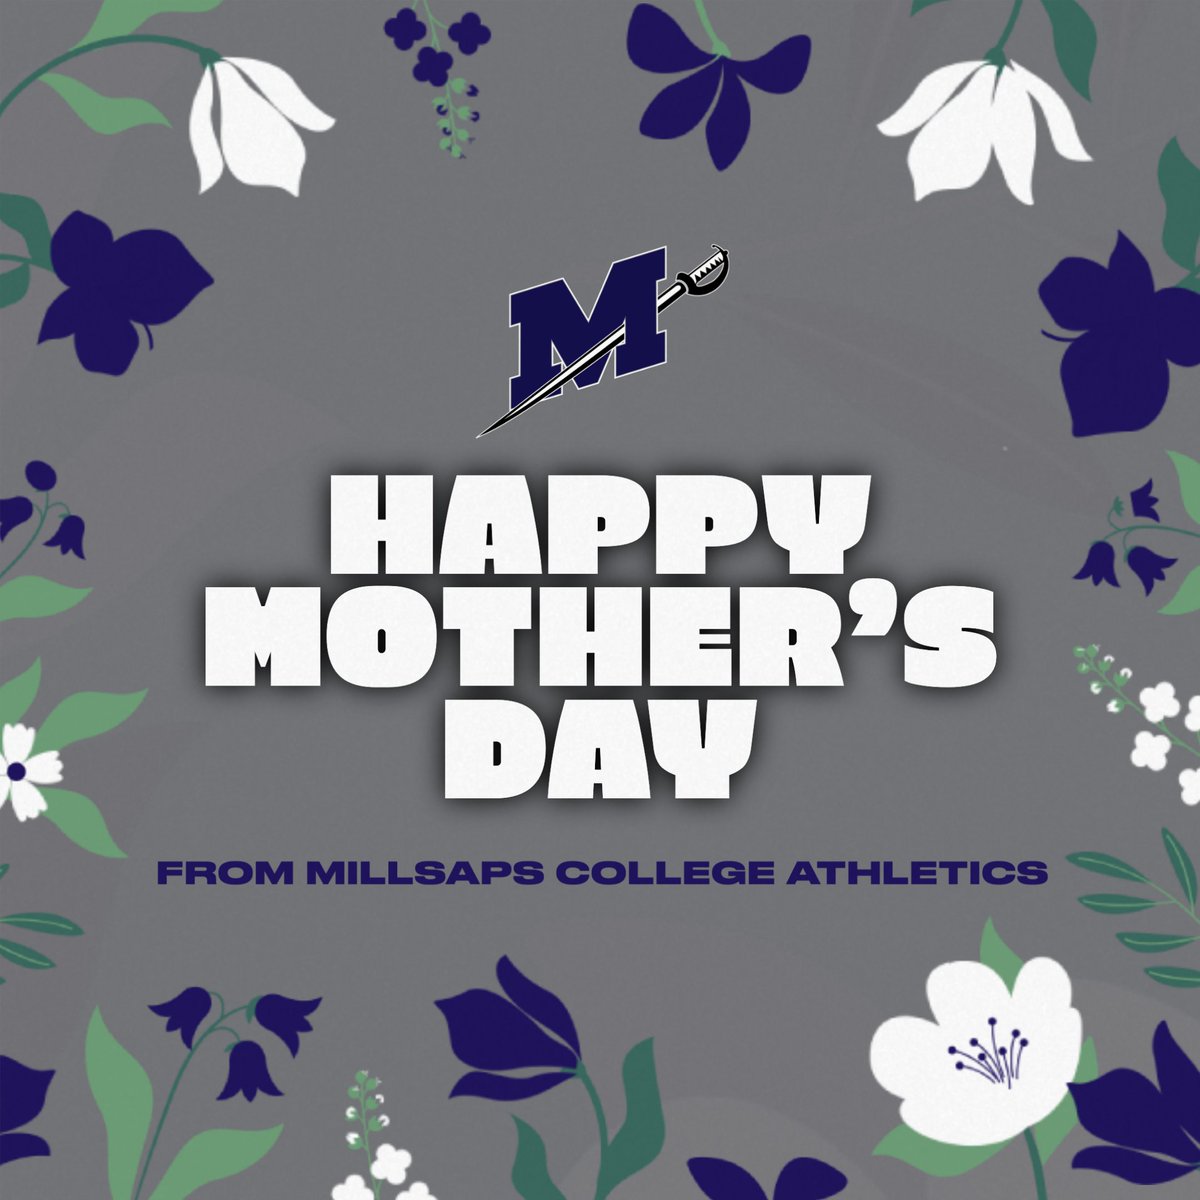 Sunday we celebrate and thank all our moms who helped guide us and raise us into the people we are today! 💐

#GoMajors